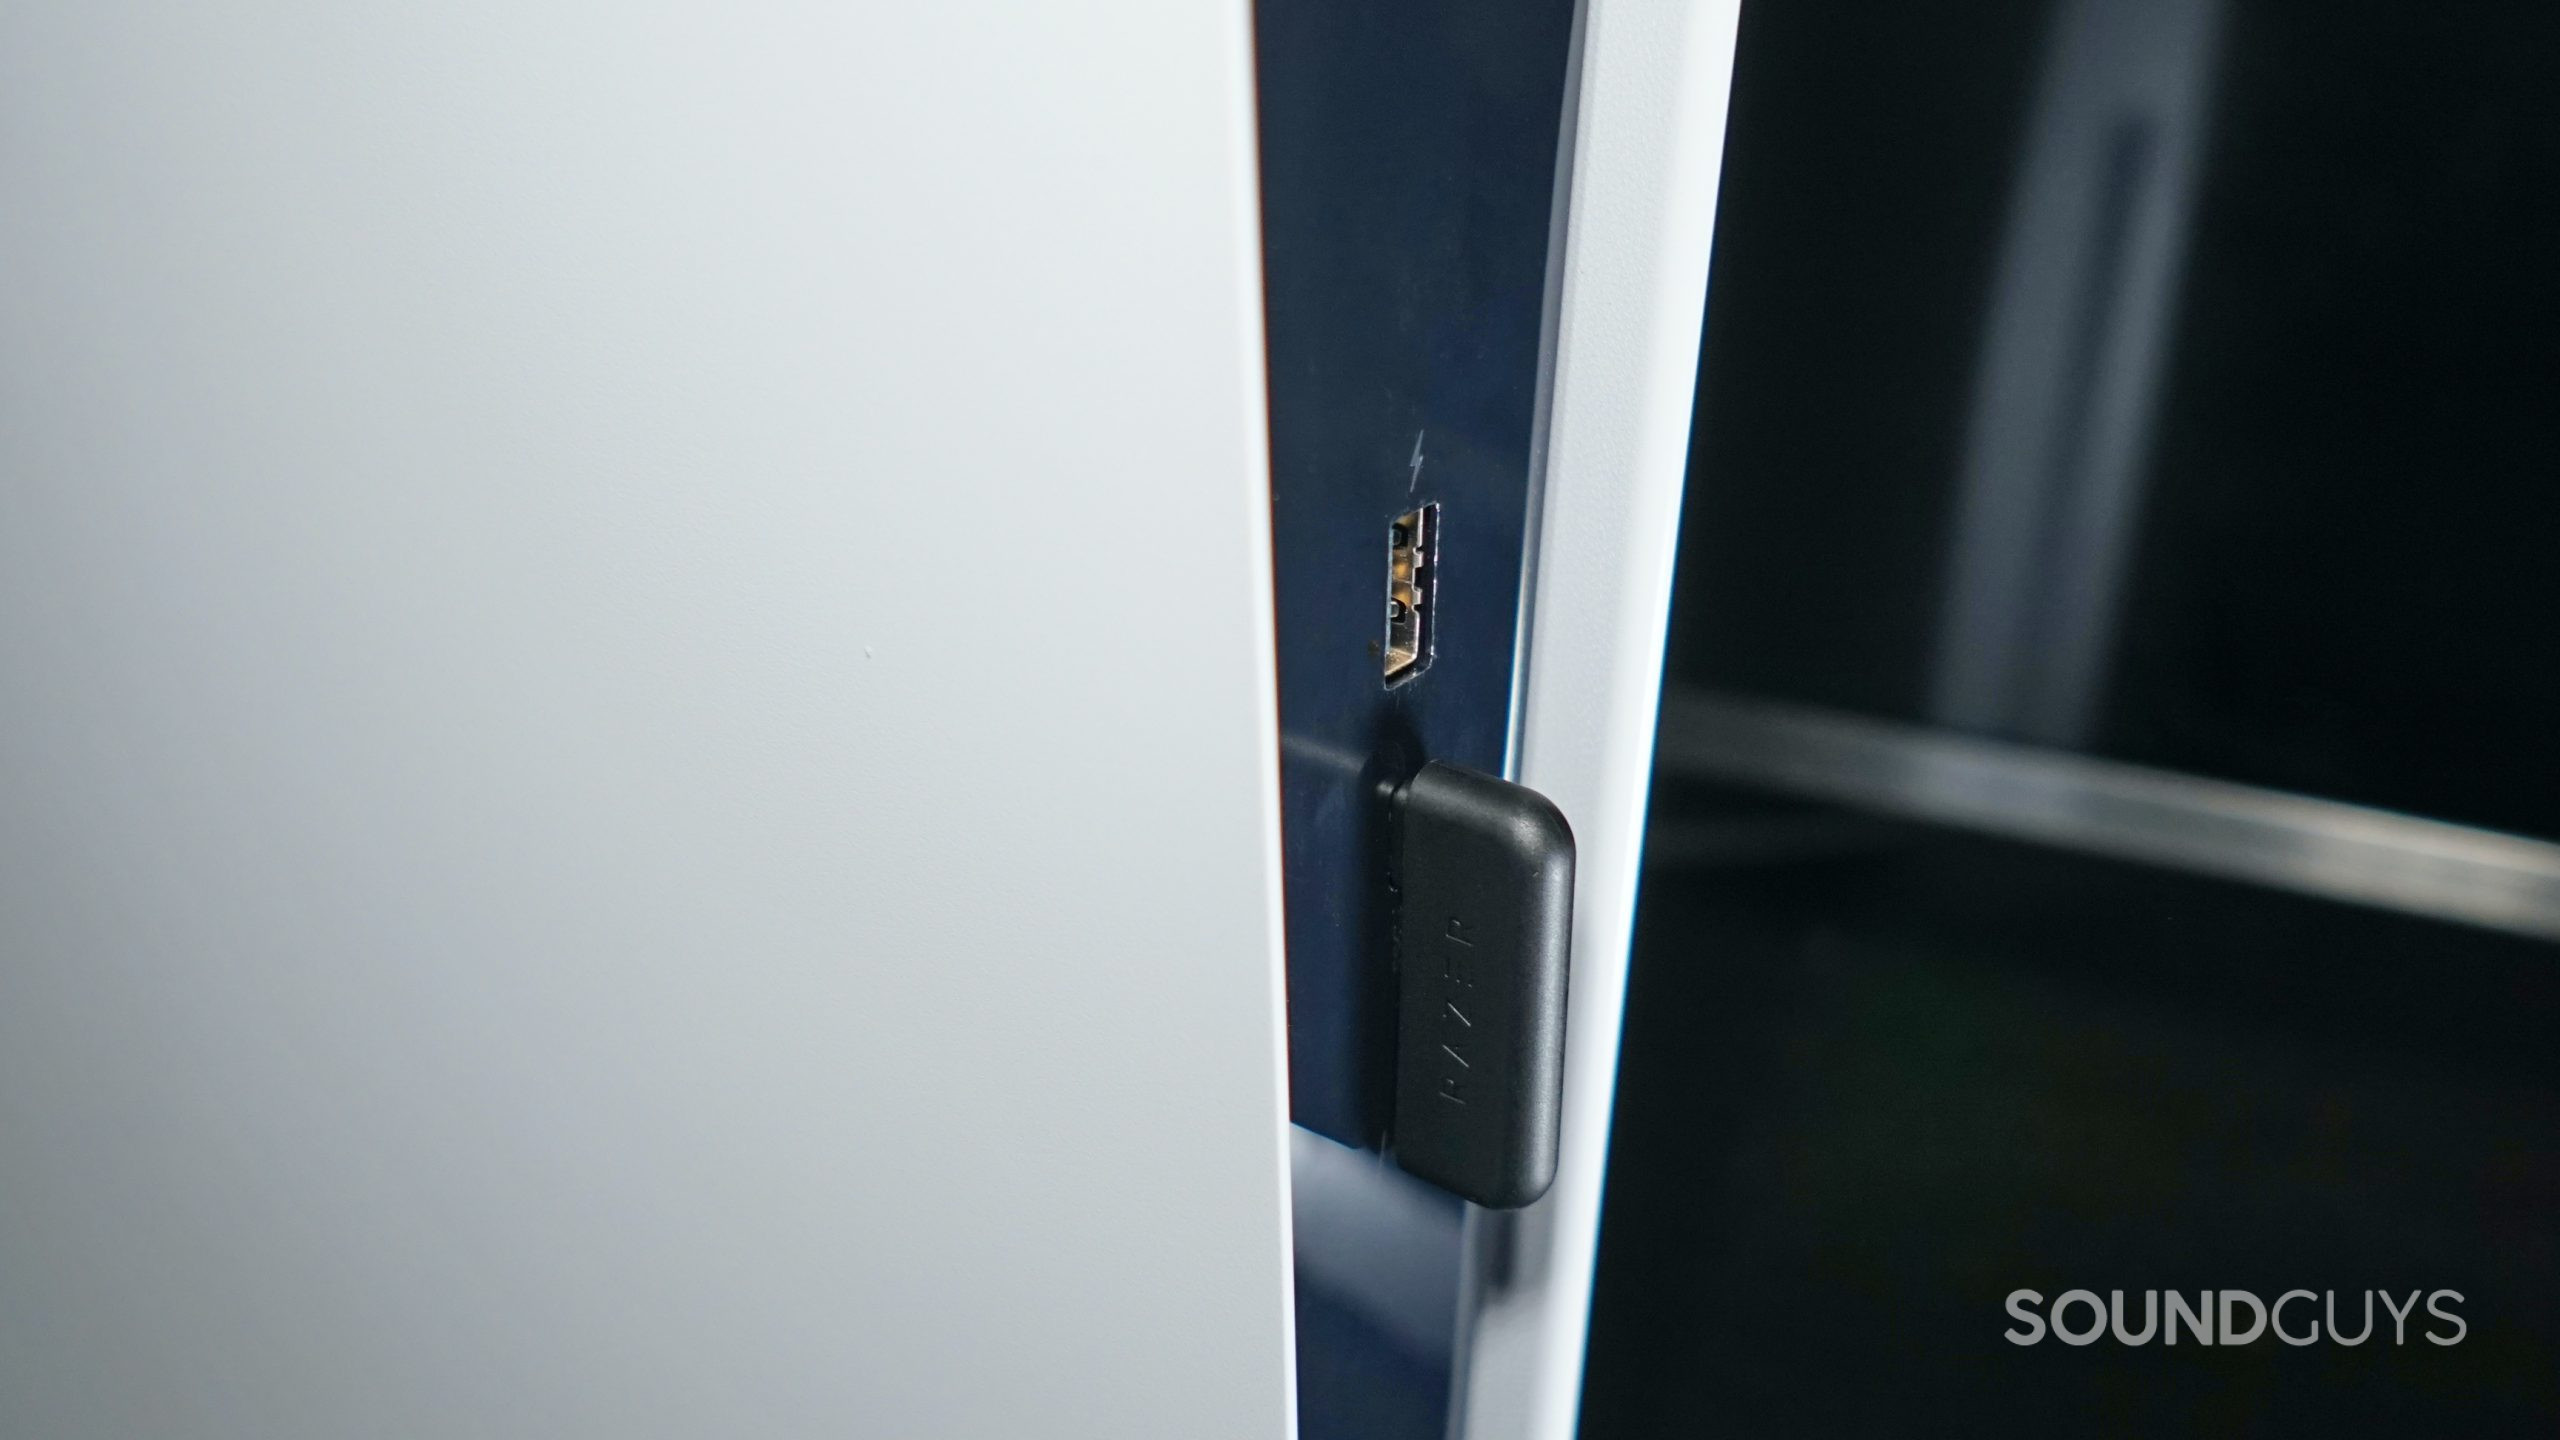 The Razer Barracuda USB-C dongle is plugged into the front port of a PlayStation 5.